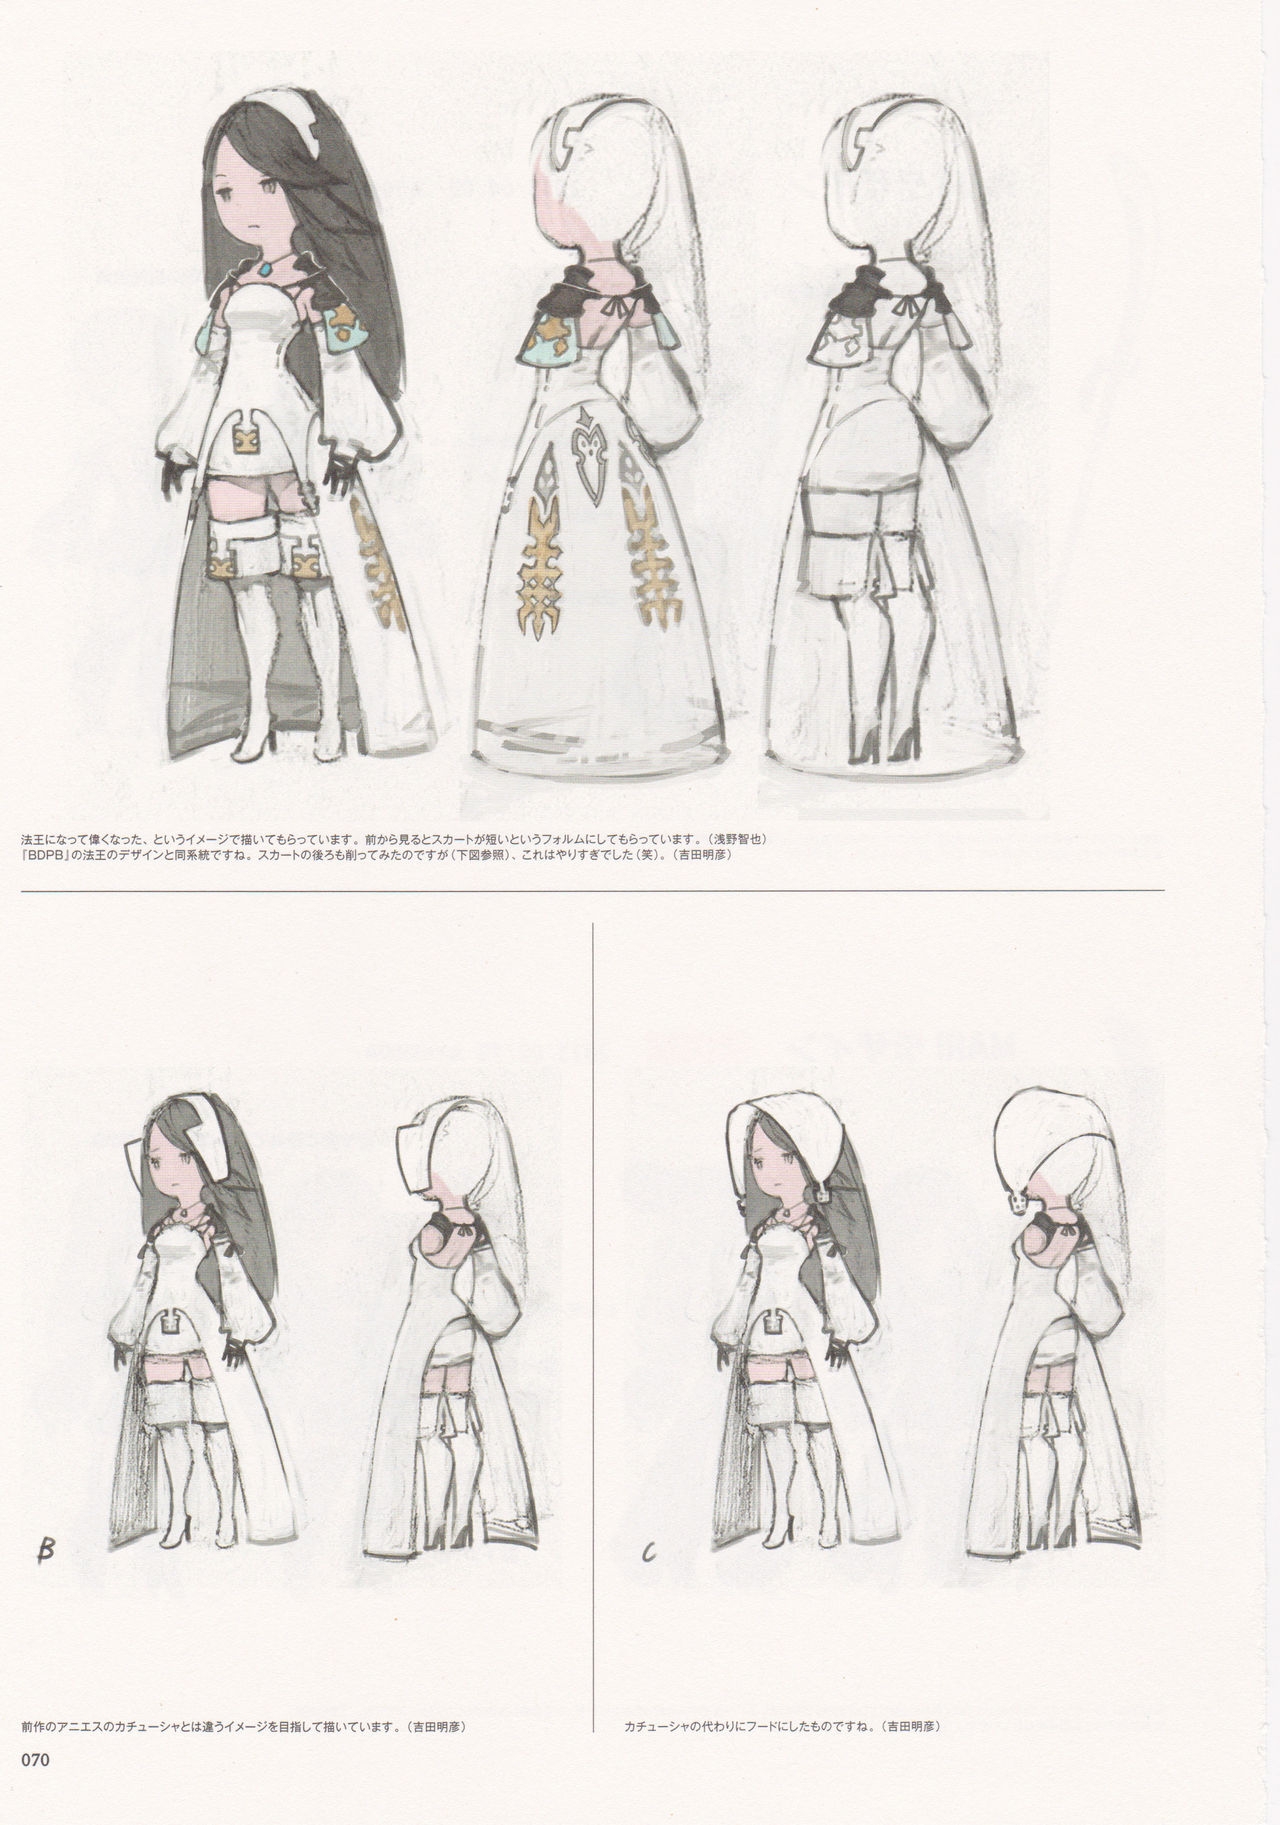 Bravely Second - End Layer - Design Works THE ART OF BRAVELY 2013-2015 70